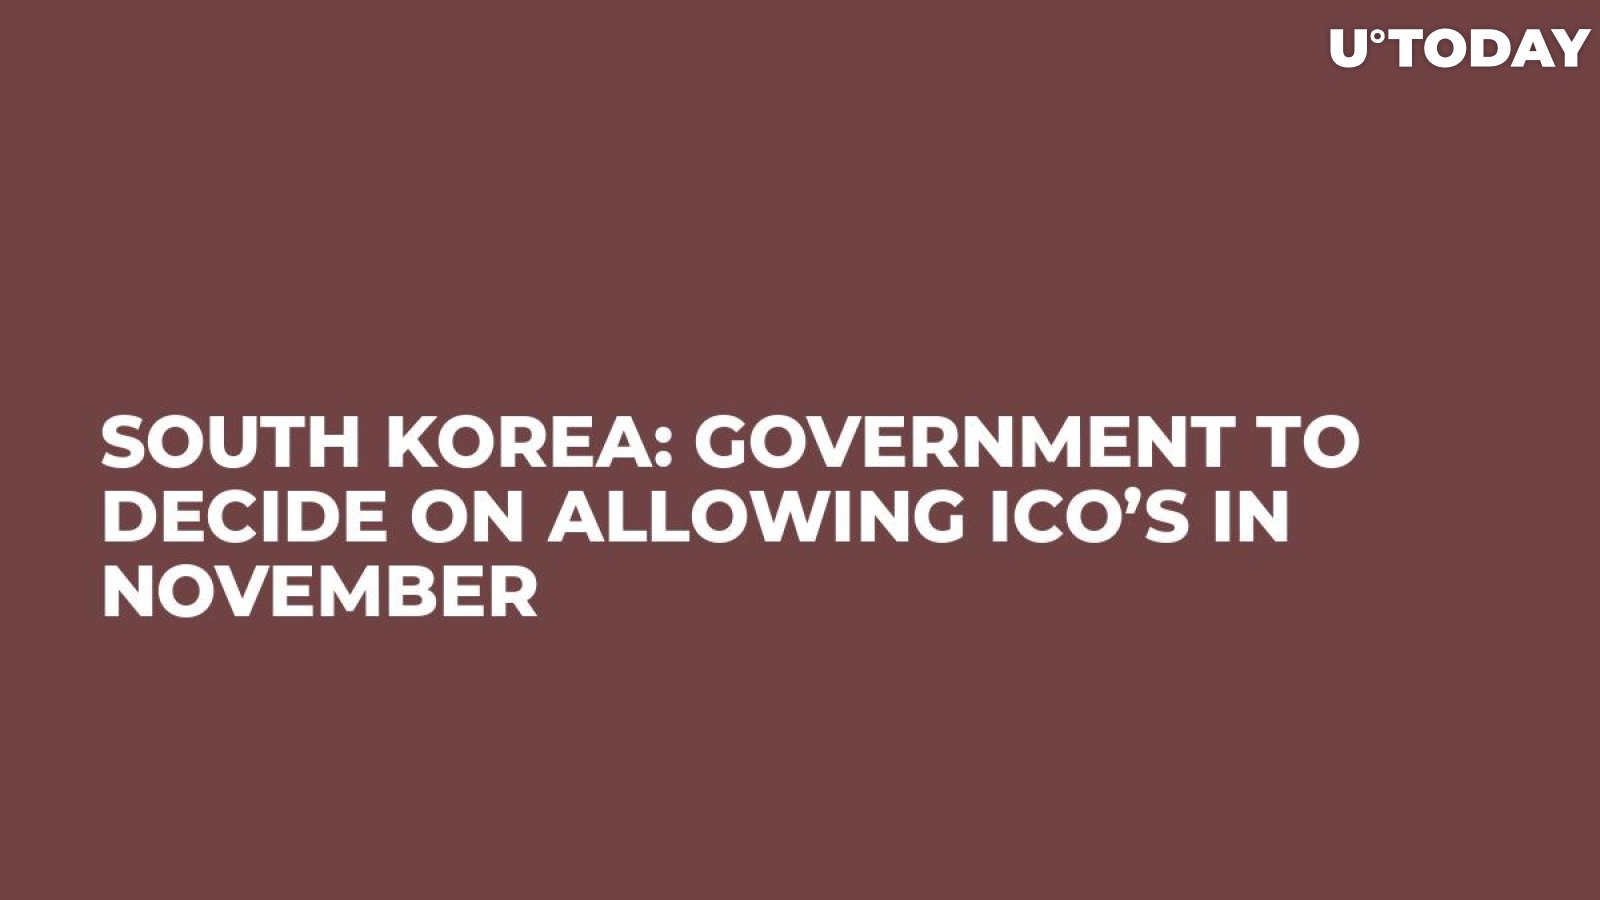 South Korea: Government To Decide On Allowing ICO’s In November